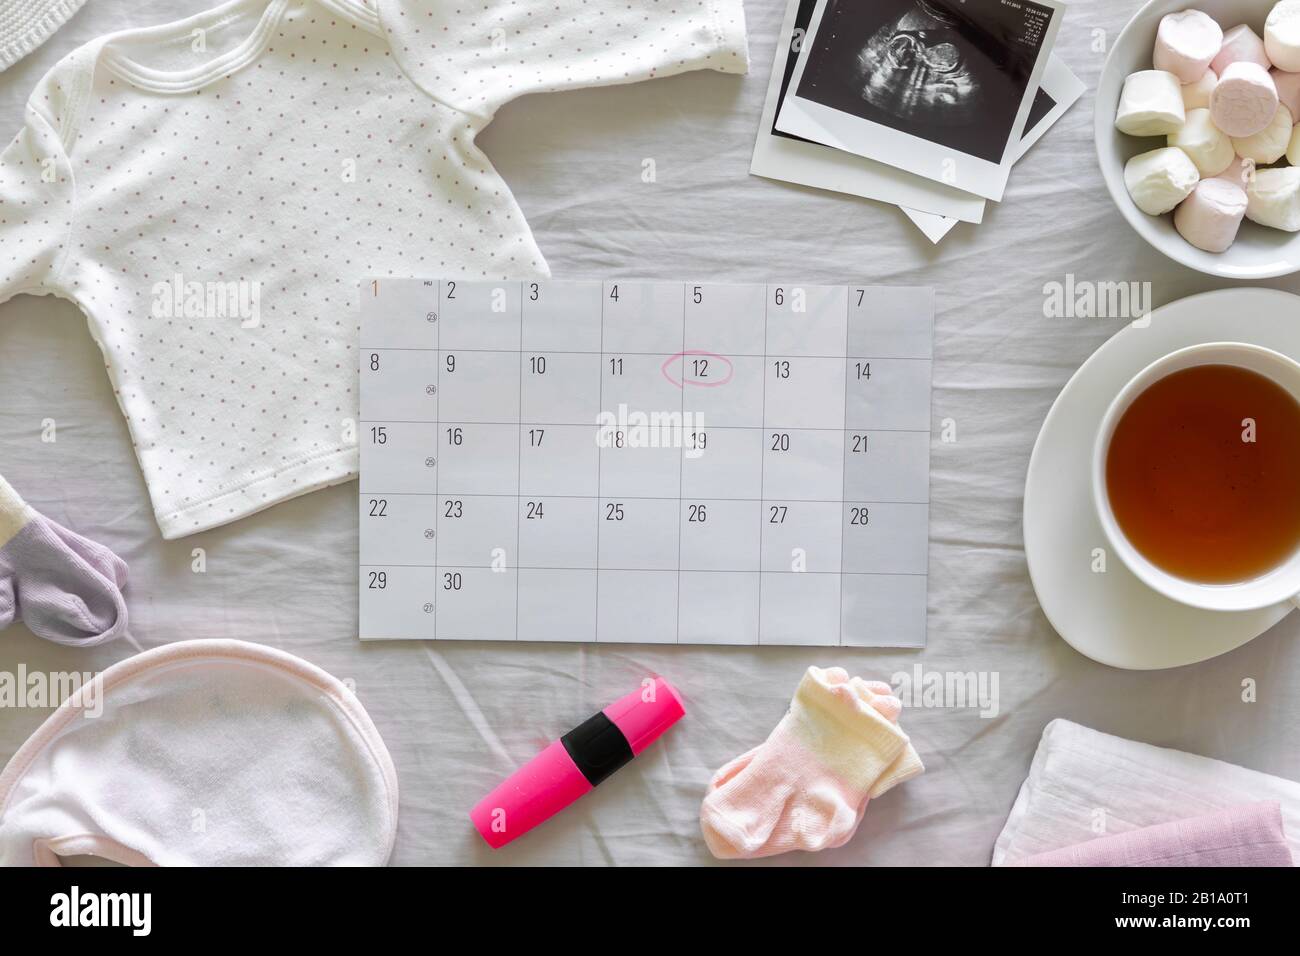 Calendar with the expected date of birth of baby, different baby clothes and ultrasound scan, pregnancy and birth concept Stock Photo